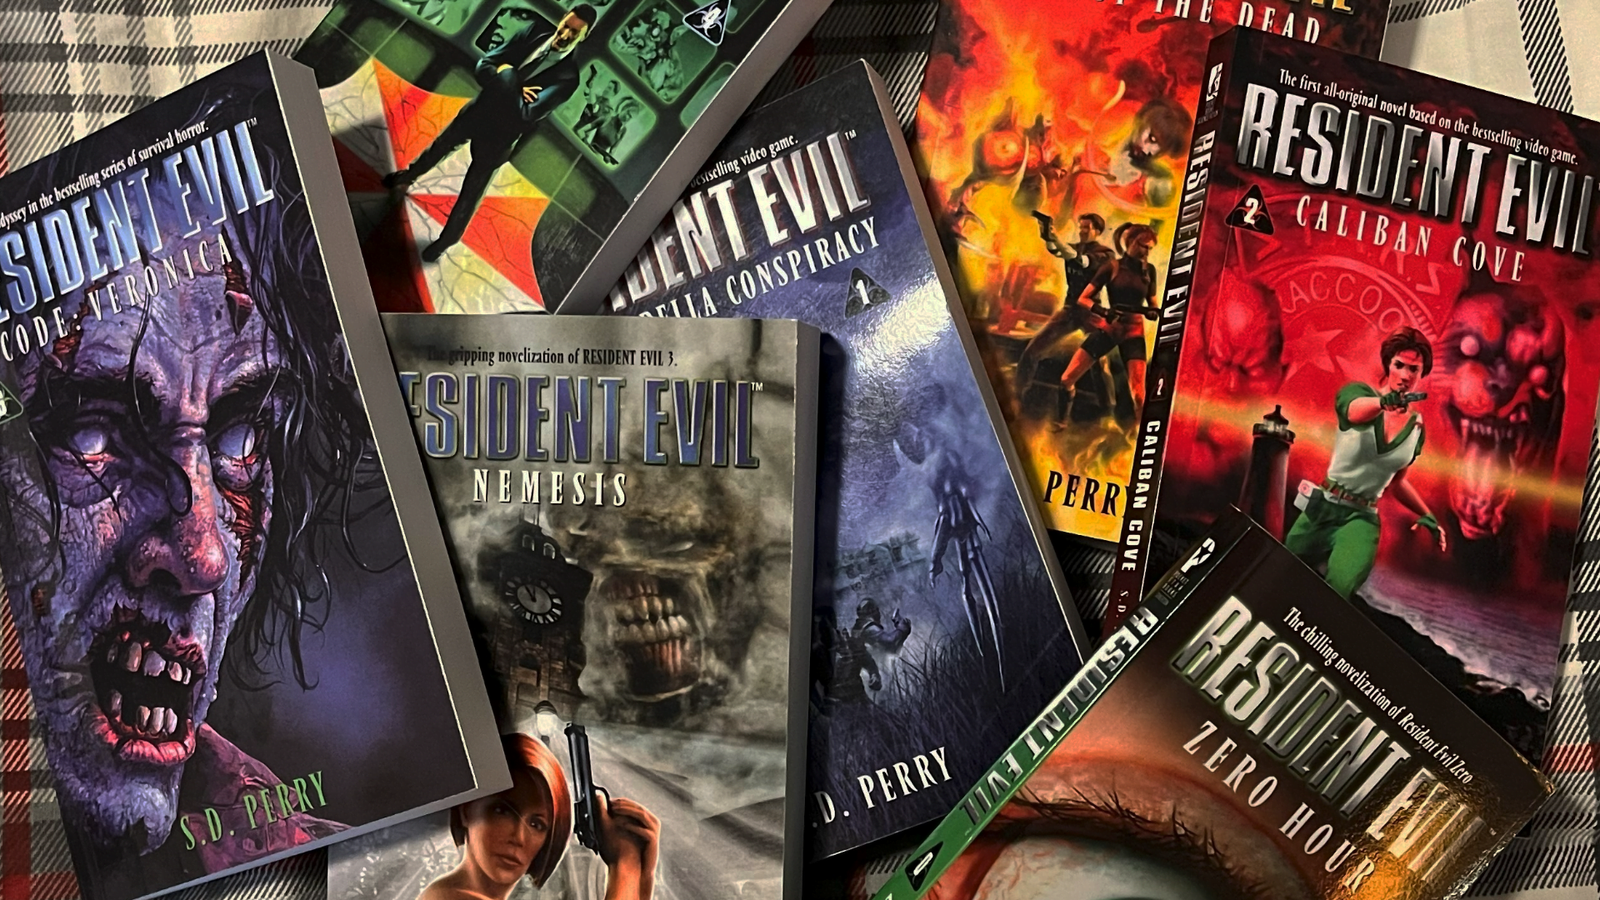 An Interview with Resident Evil Novelization Author, S.D. Perry